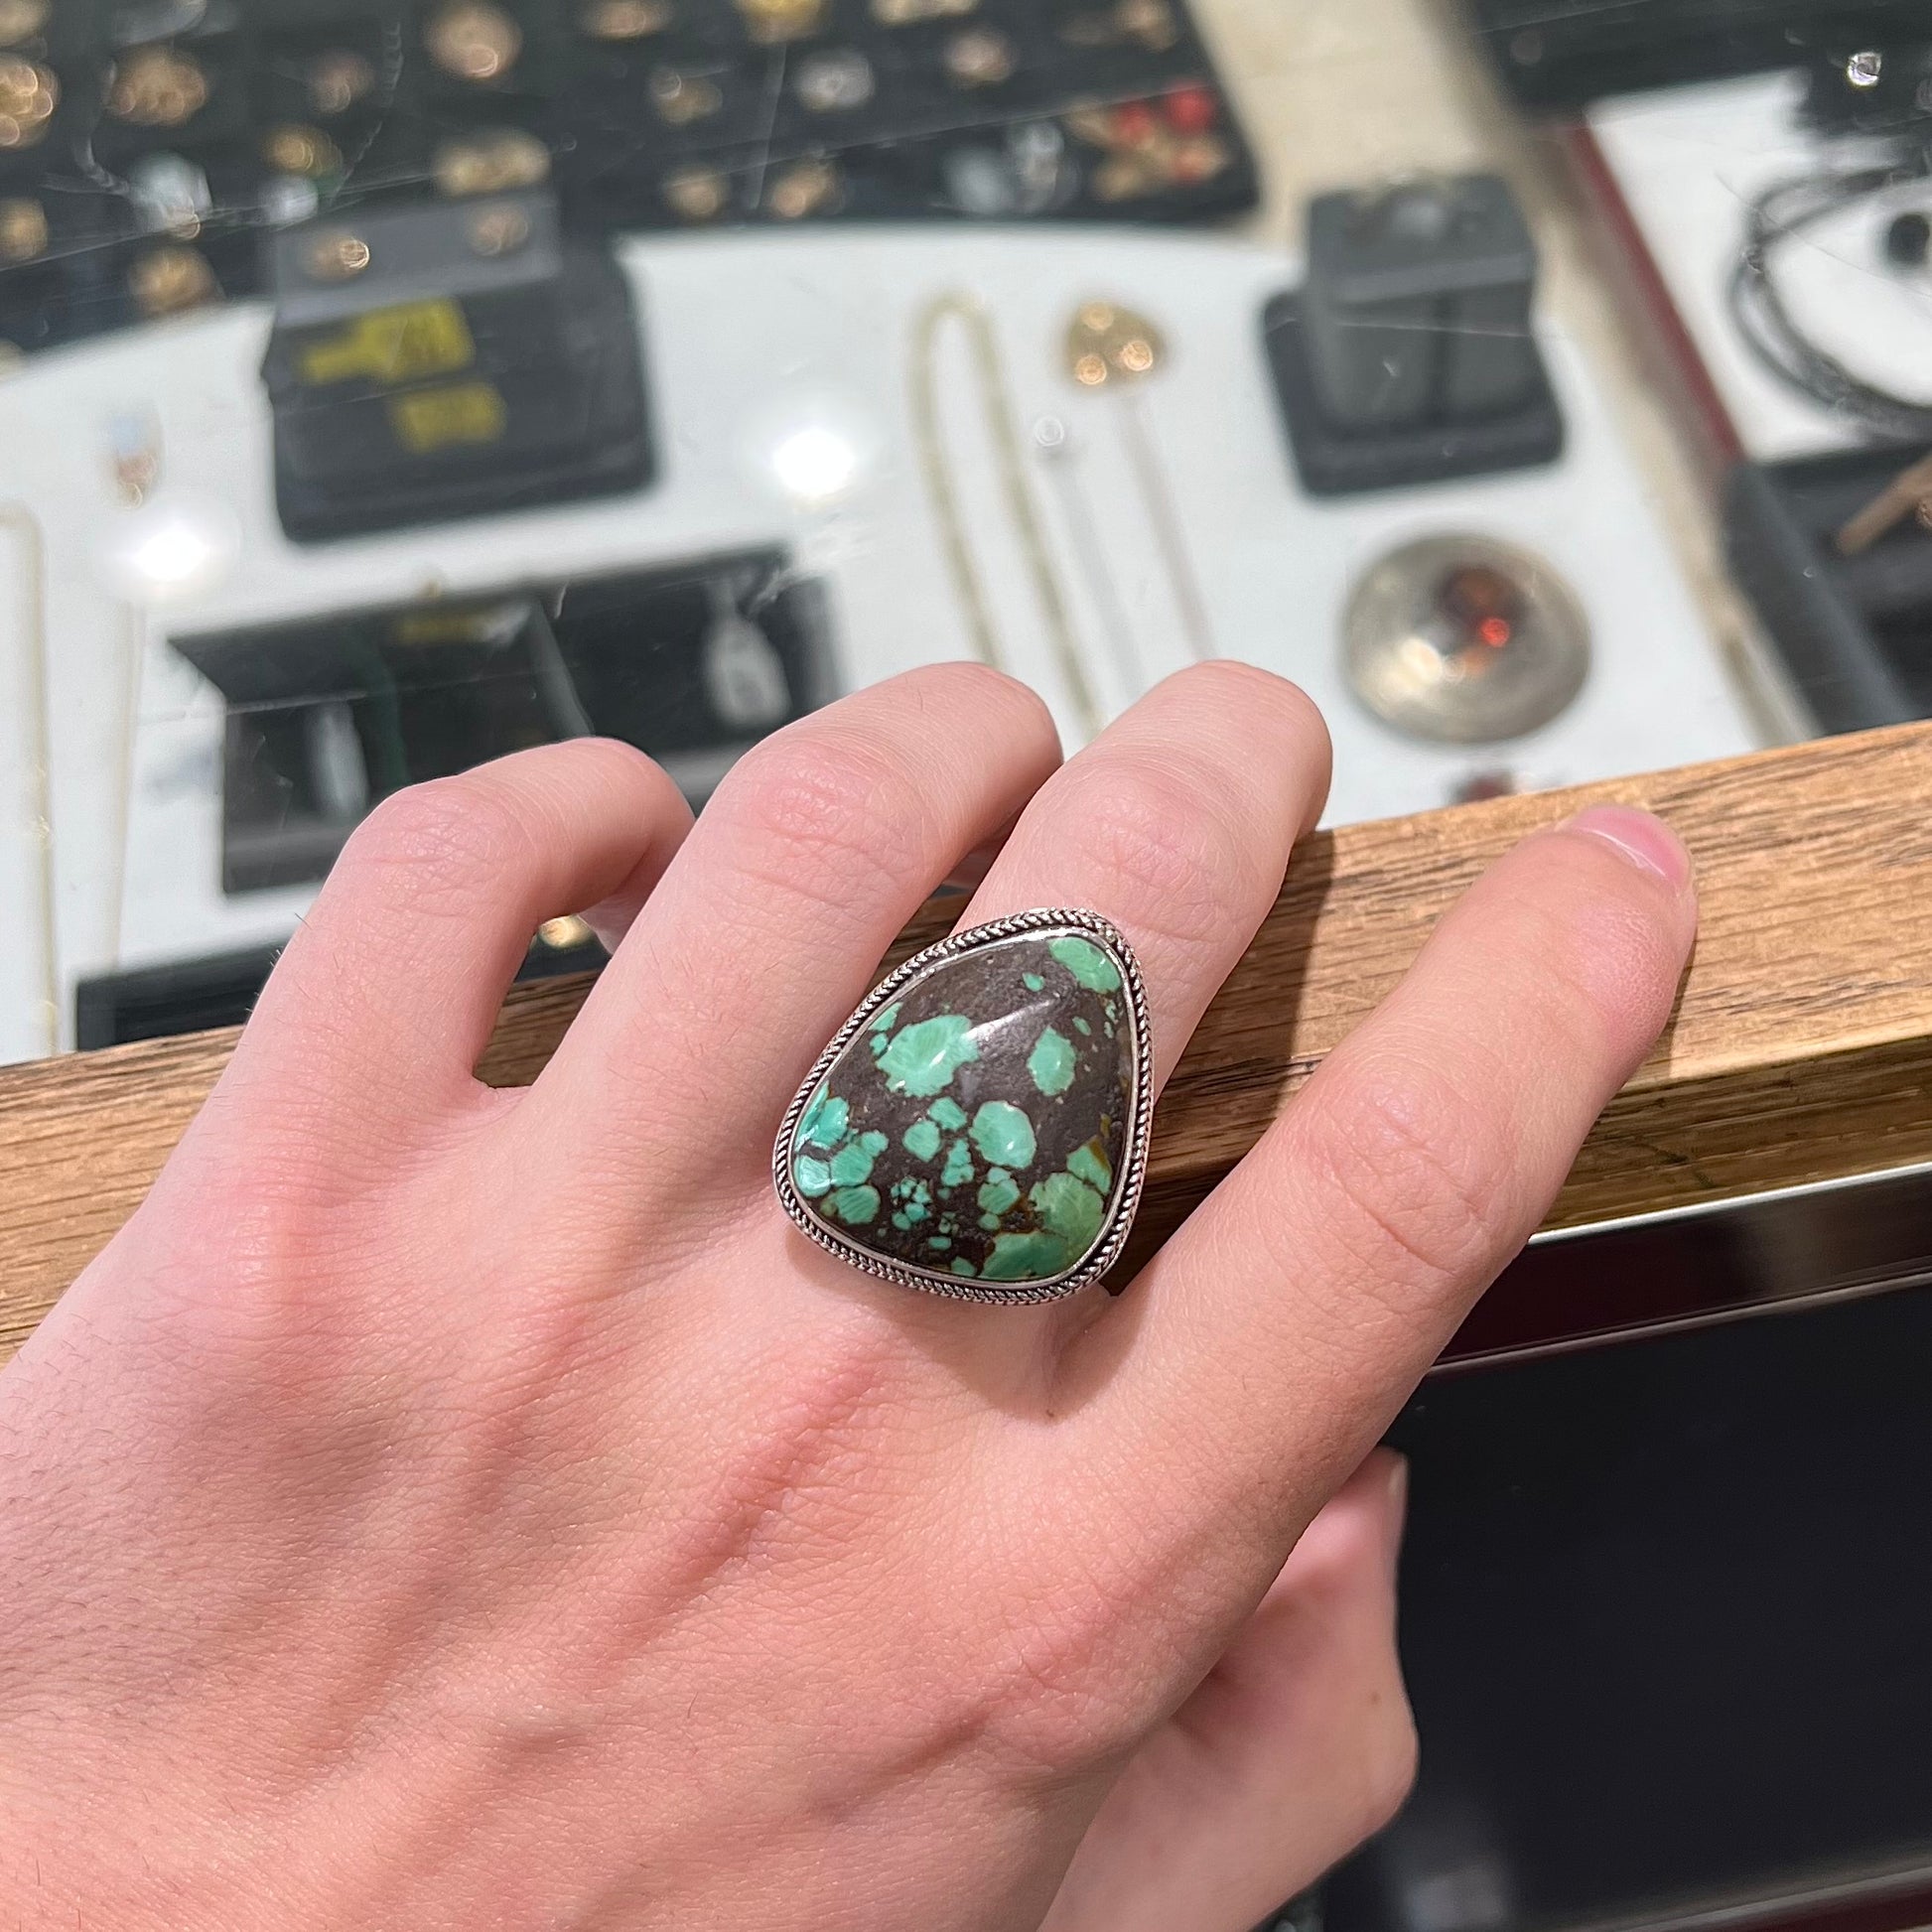 A sterling silver ring bezel set with a green spotted turquoise stone from Carico Lake, Nevada.